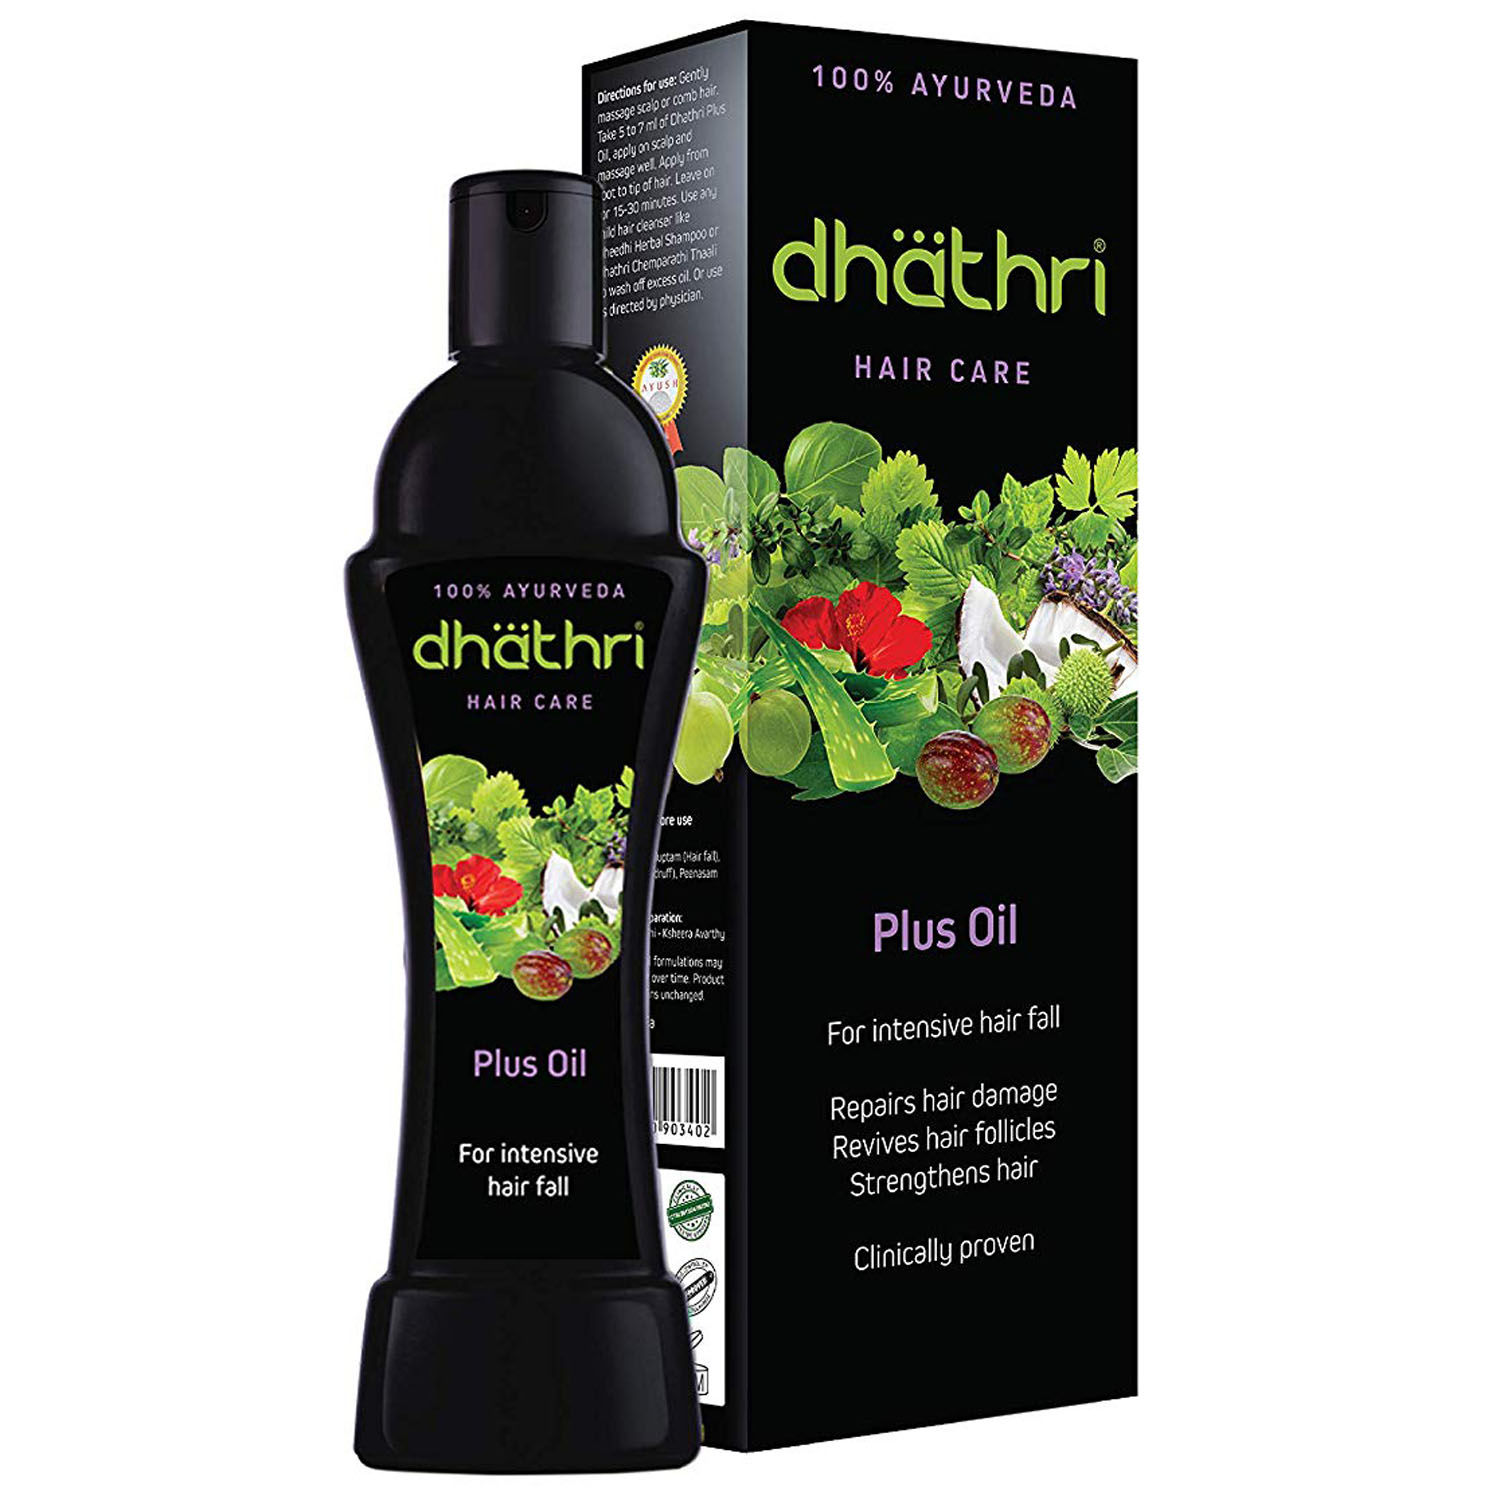 Dhathri Hair Care Plus Oil, 100 ml Price, Uses, Side Effects, Composition -  Apollo Pharmacy